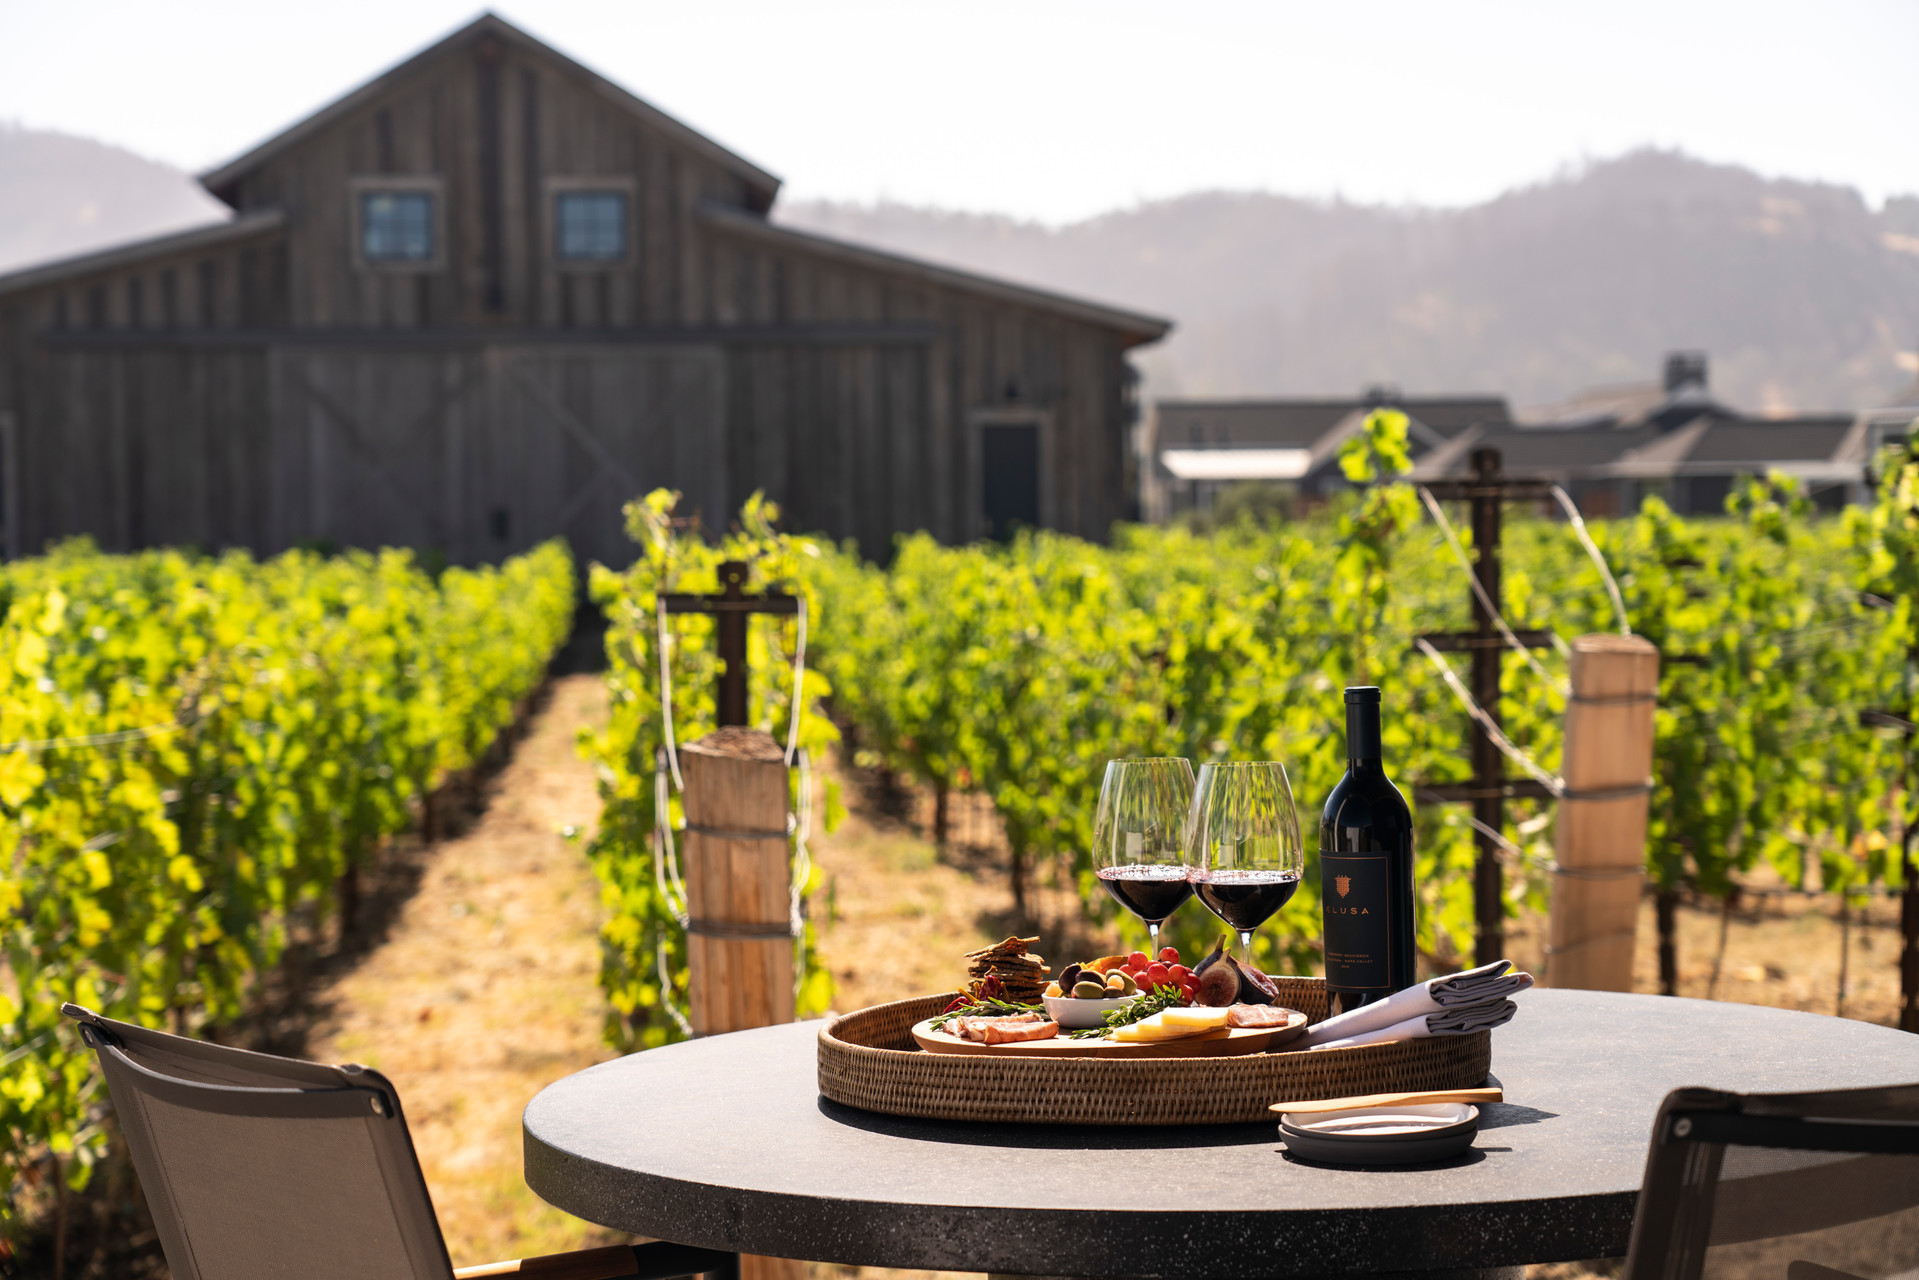 https://www.sunset.com/wp-content/uploads/Outdoor-Picnic-in-the-Vineyard-at-Four-Seasons-Resort-Napa-Valley.jpg